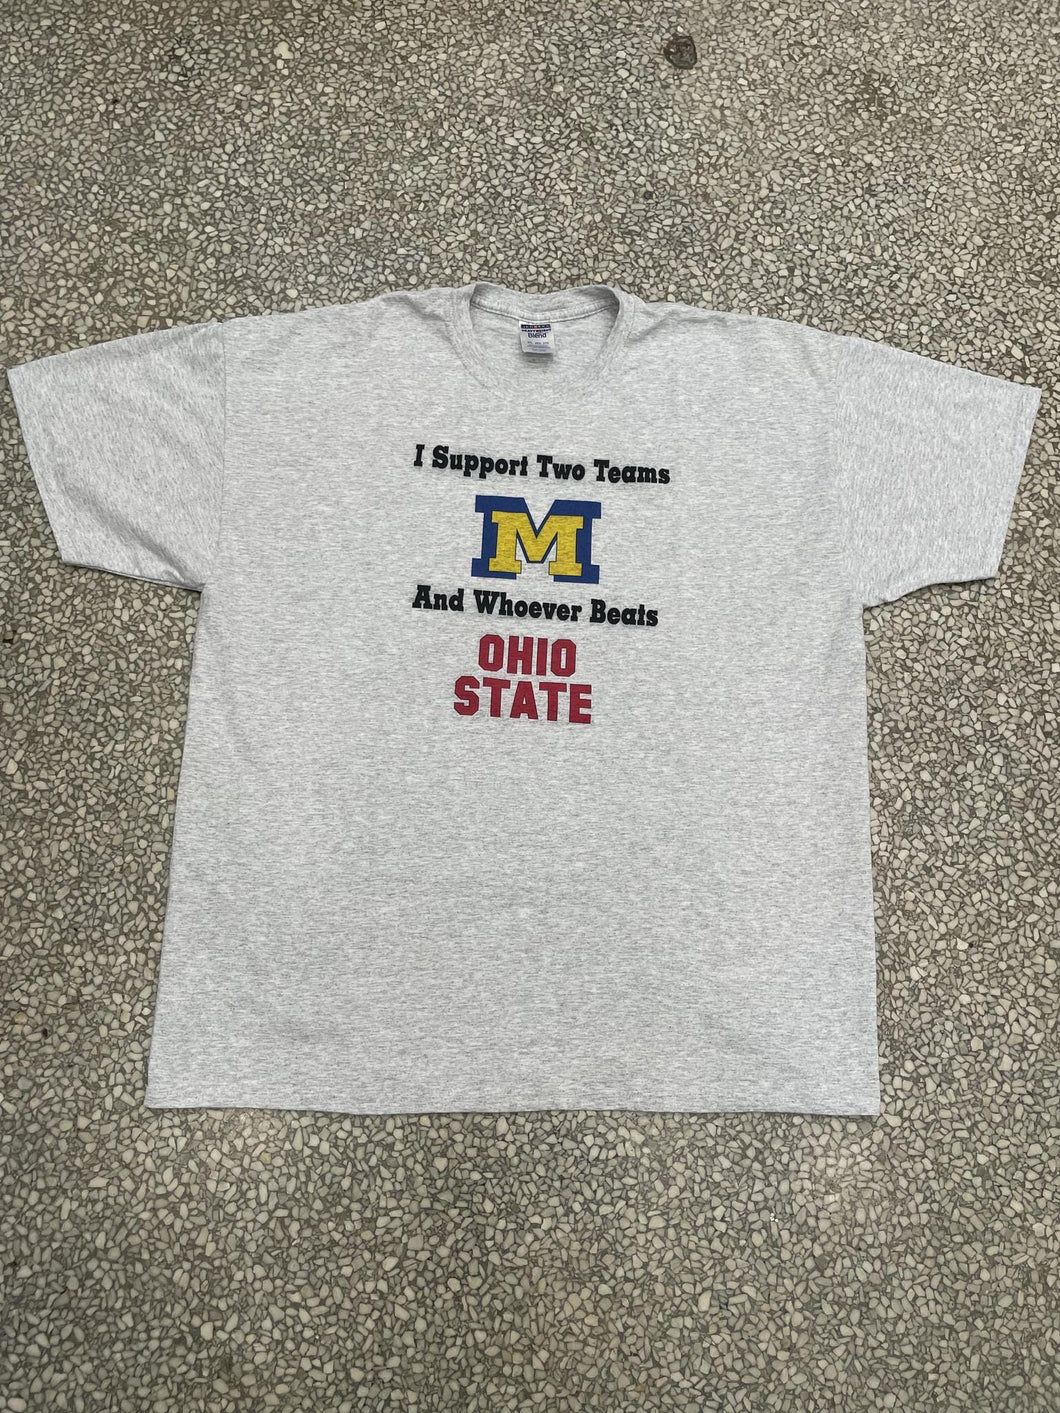 Michigan Wolverines Vintage 90s I Support Two Teams Michigan And Whoever Beats Ohio State Grey ABC Vintage 